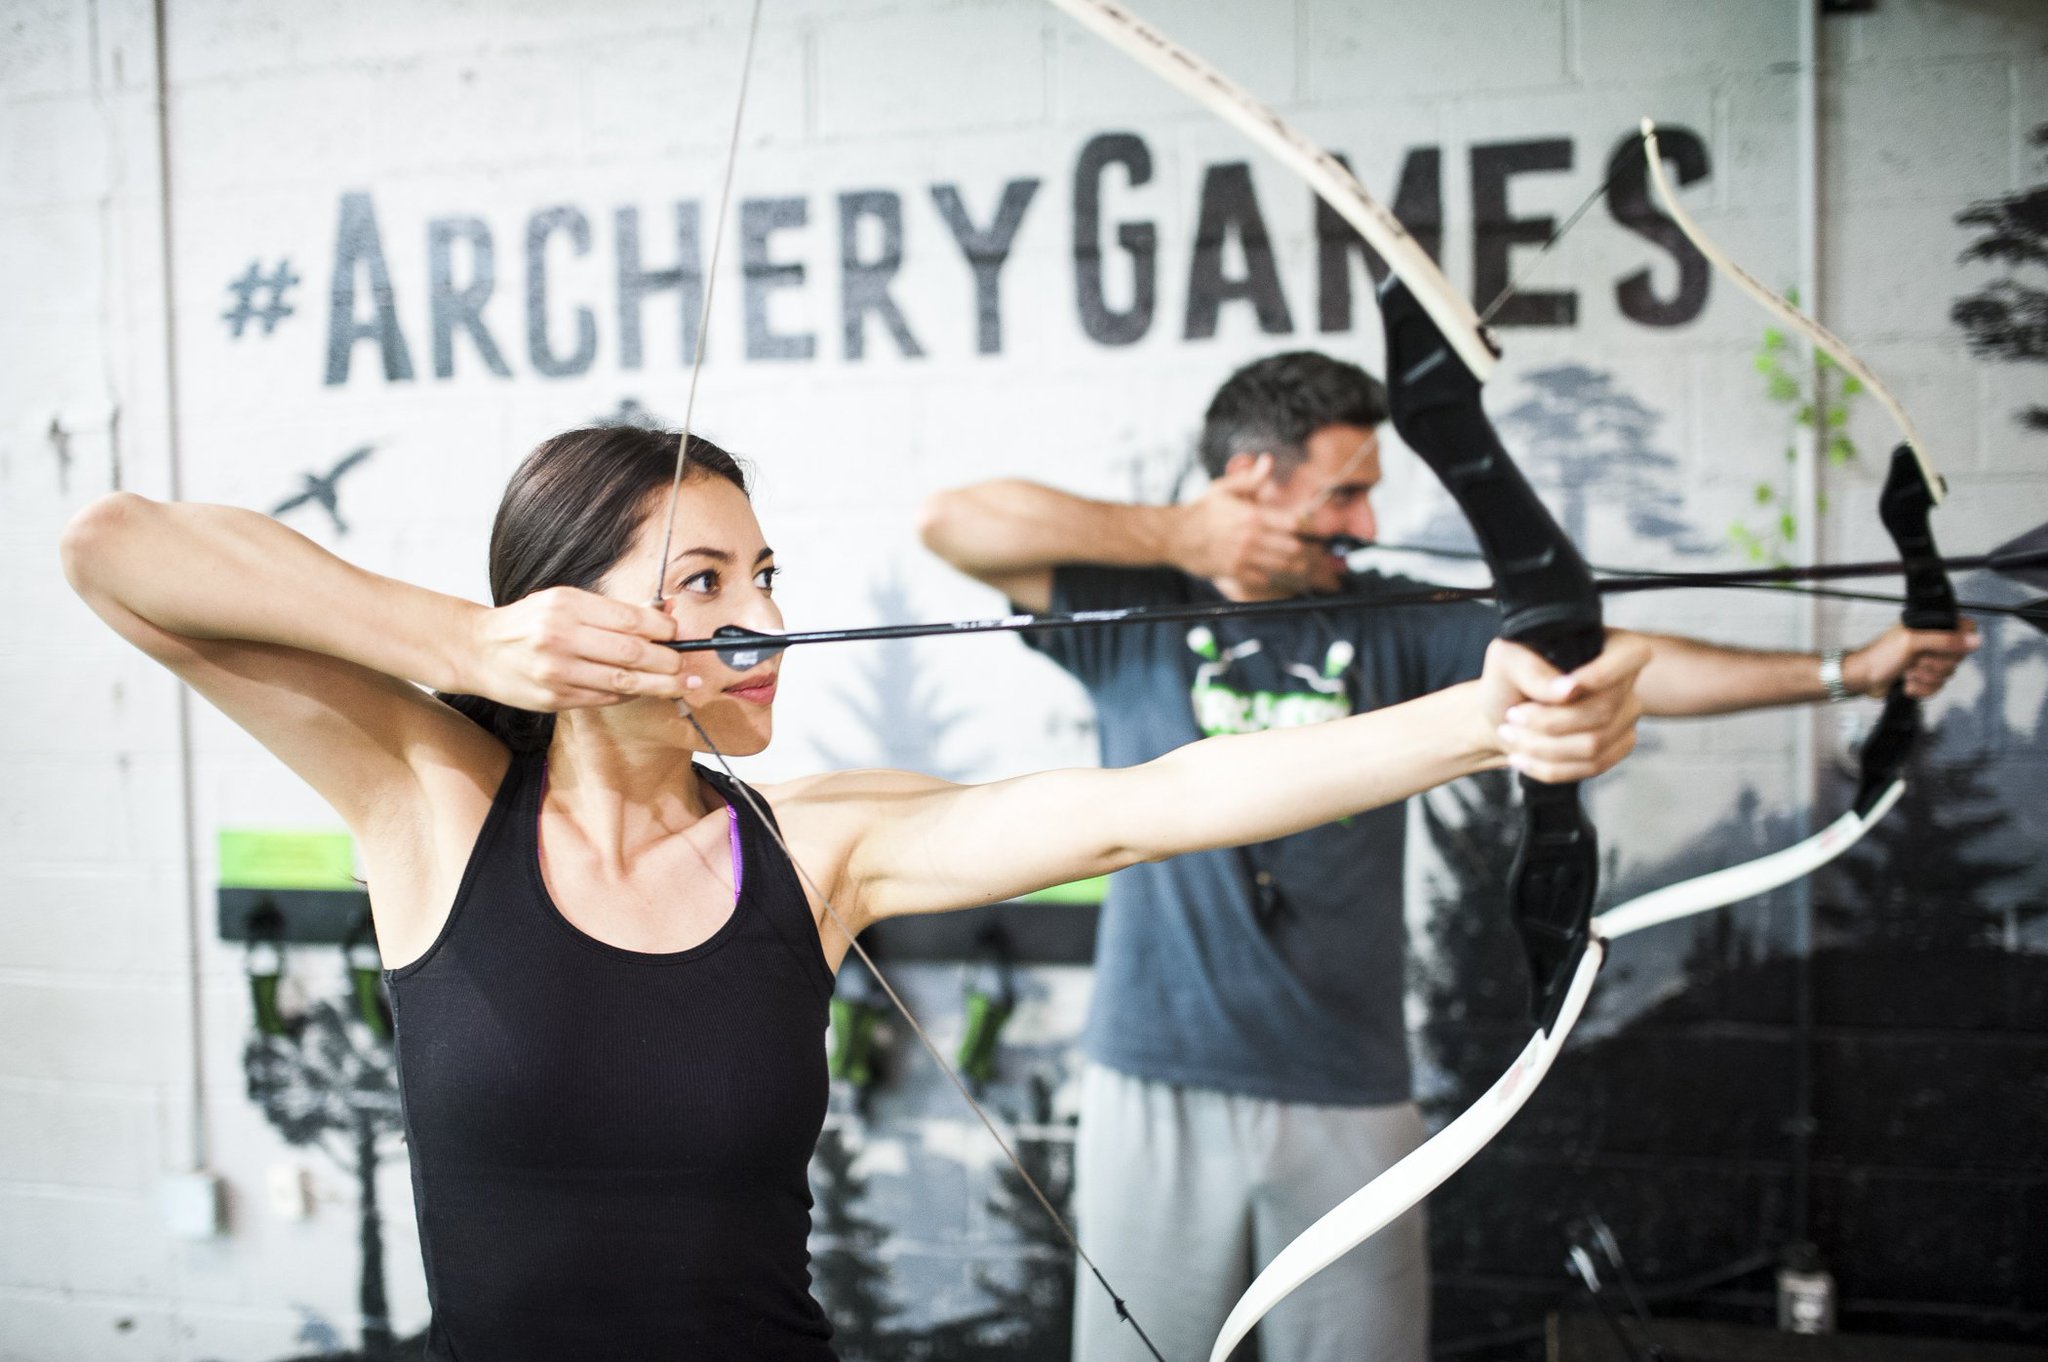 Archery Games Boston Boston S First And Only Archery Facility Shoot Your Friends And Family With Our Foam Tipped Arrows Family Friendly Fun And A Great Workout T Co Bi51t8czt0